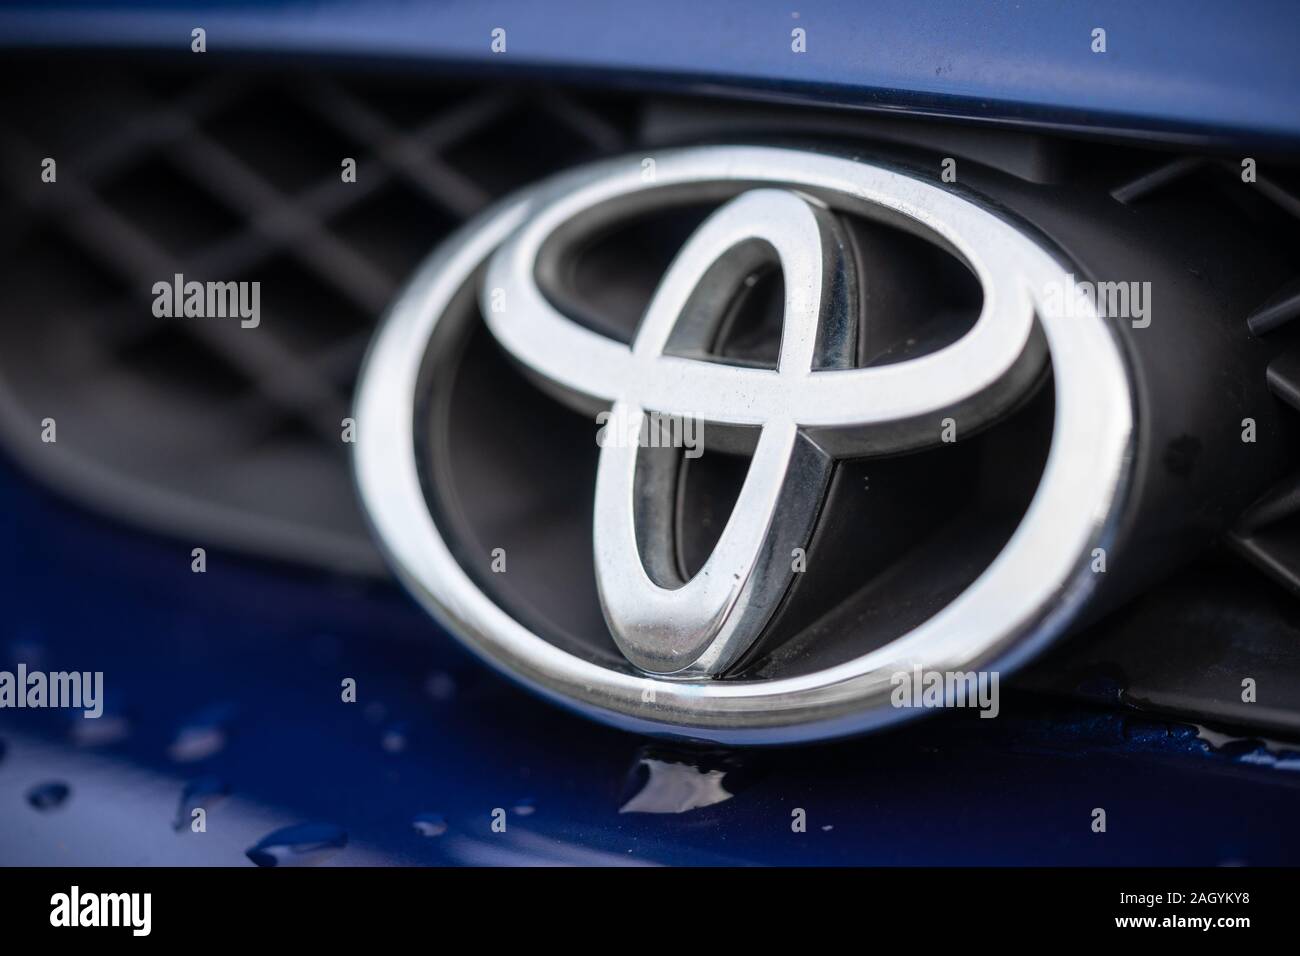 Close up of a silver metal Toyota logo at the front of a Toyota car Stock Photo